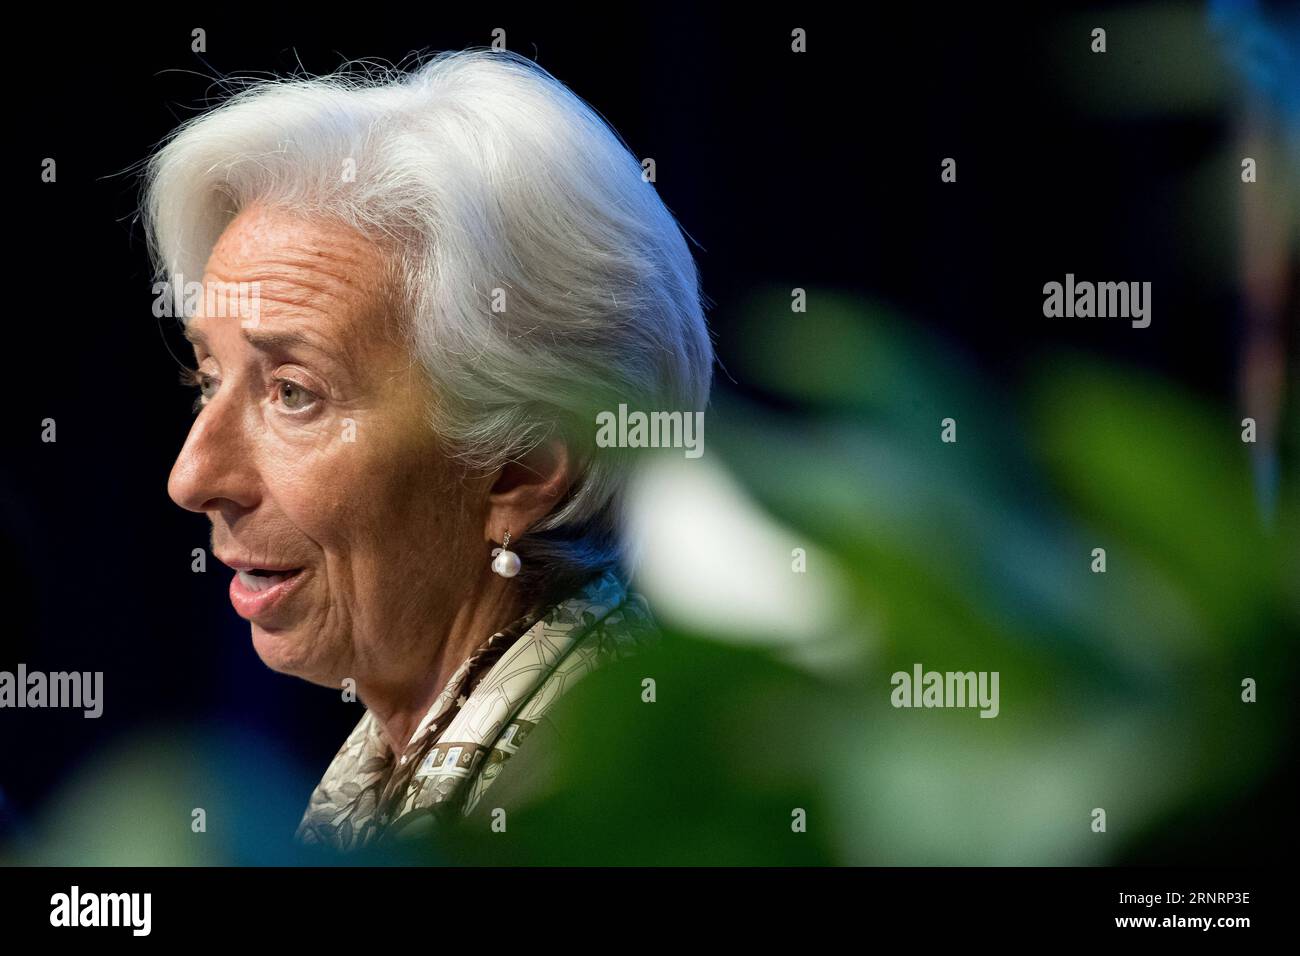 (171012) -- WASHINGTON D.C., Oct. 12, 2017 -- Christine Lagarde, managing director of the International Monetary Fund (IMF), speaks at a Civil Society Townhall meeting at the World Bank Headquarters in Washington D.C., the United States, Oct. 11, 2017. ) (jmmn) U.S.-WASHINGTON D.C.-WORLD BANK-IMF-MEETING TingxShen PUBLICATIONxNOTxINxCHN Stock Photo